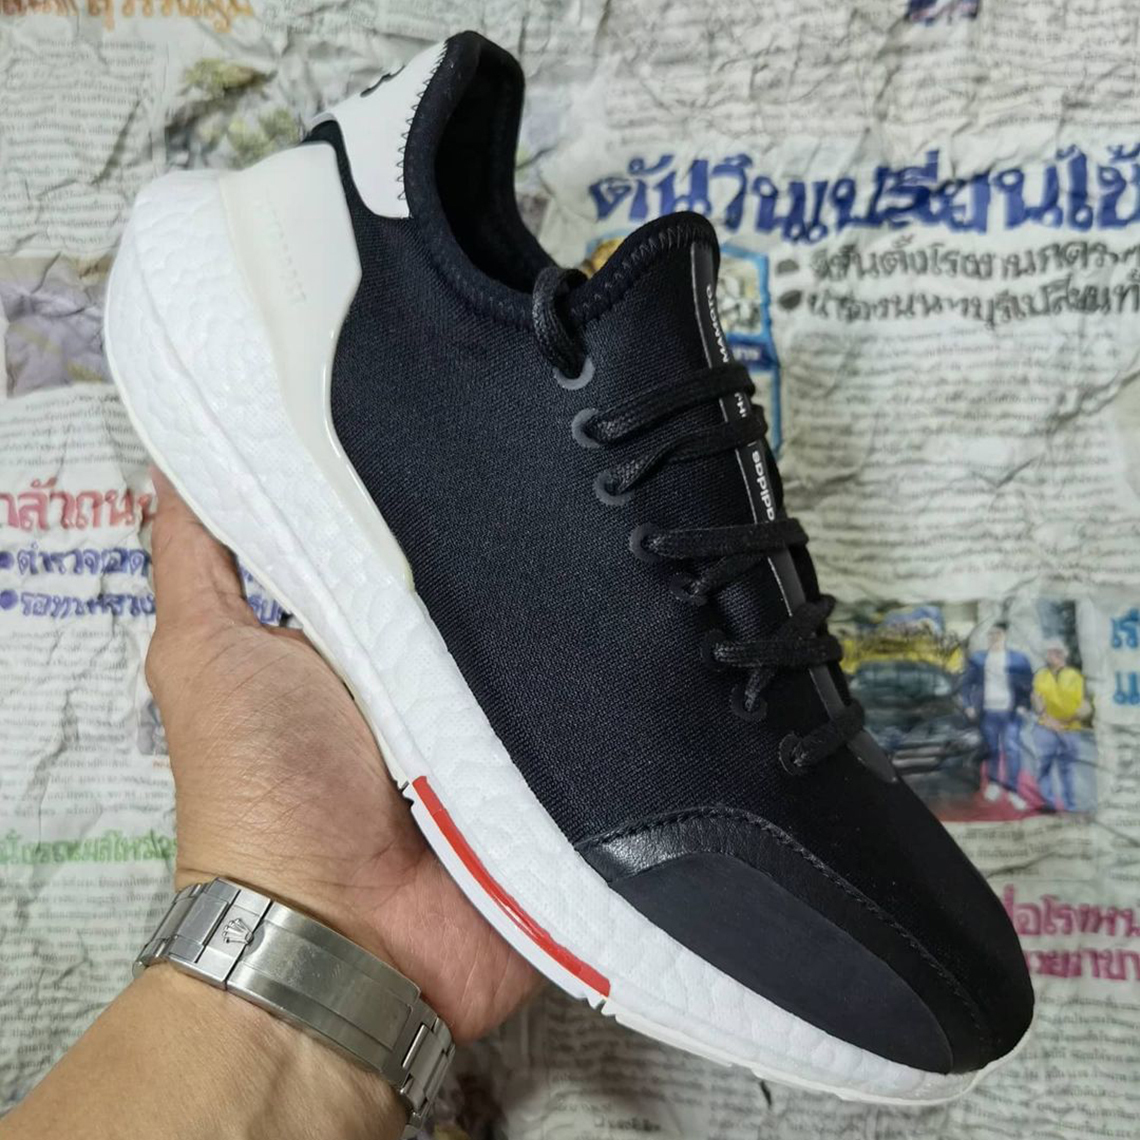 First Look at the adidas Y-3 Ultraboost 21